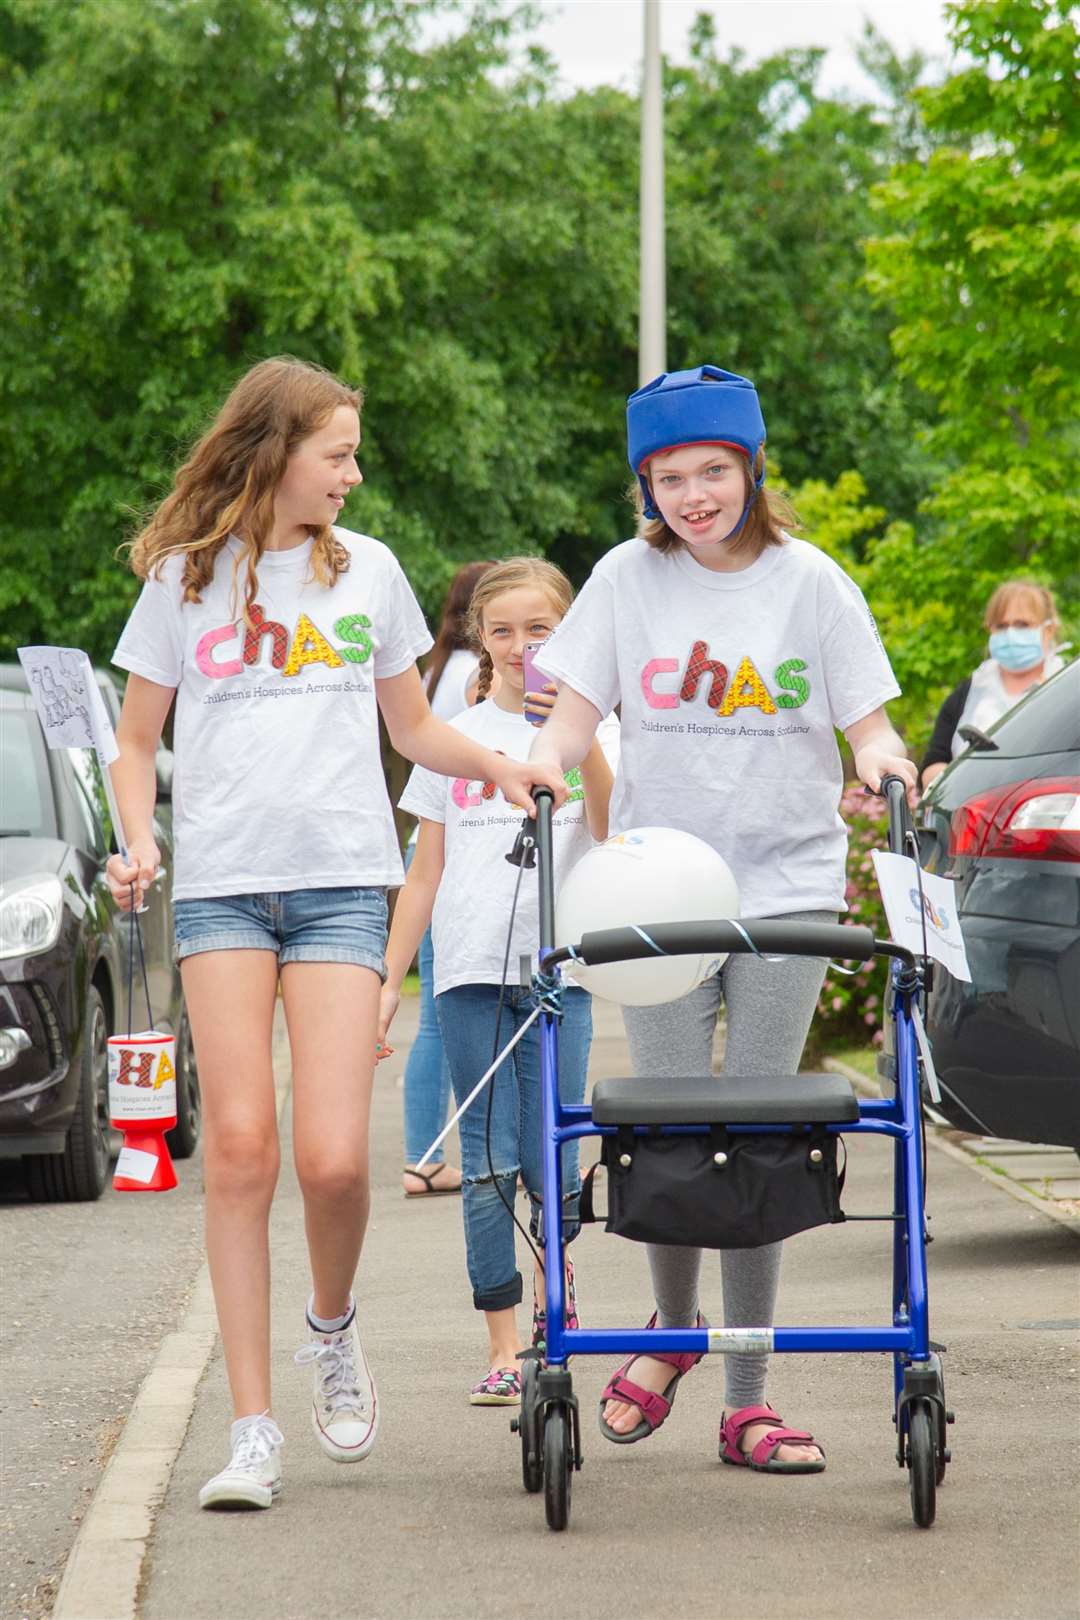 Ella Langdale (15) has Lennox gastaut syndrome and is walking 10km over 100 laps around her street in Elgin to raise money for the team at CHAS who have been helping look after her during lockdown...Picture: Daniel Forsyth..